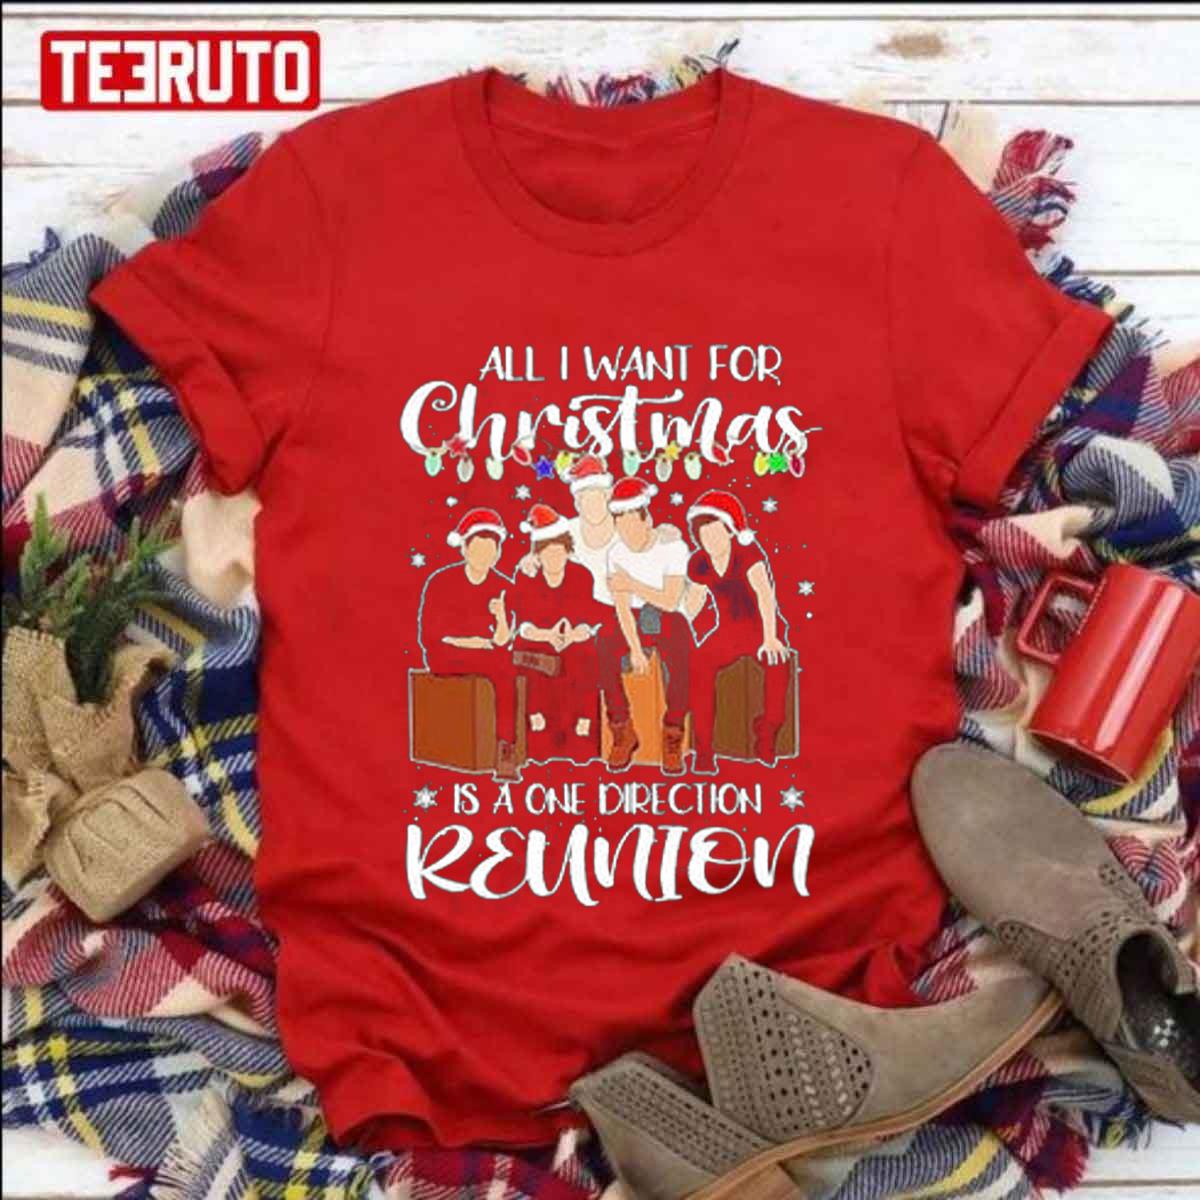 All I Want For Christmas Is A One Direction Reunion Unisex Sweatshirt T-Shirt